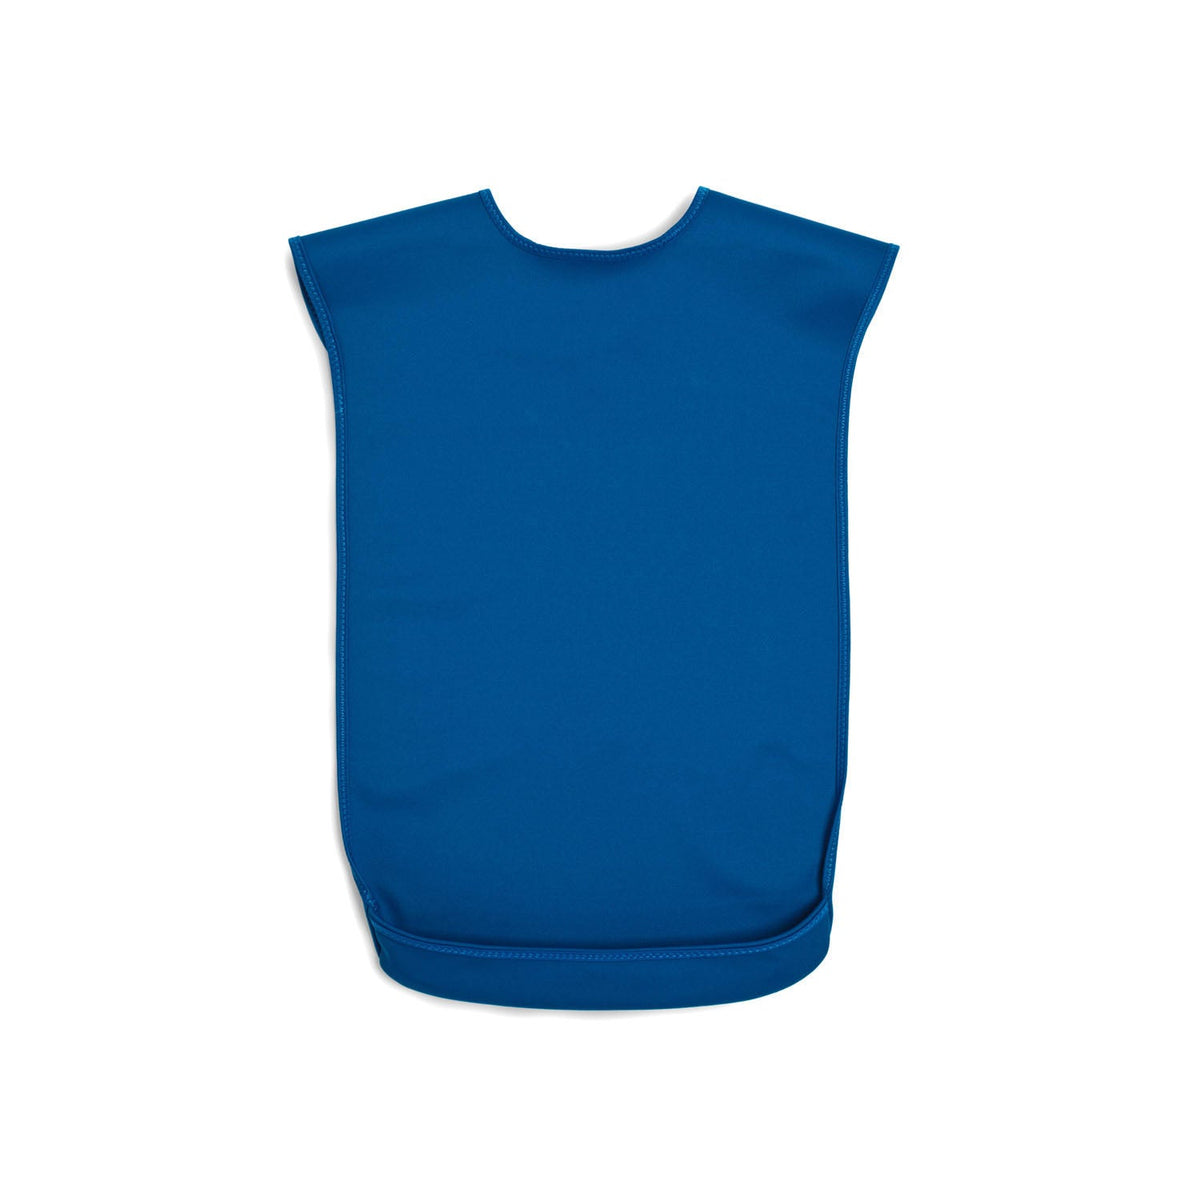 Tabard style adult bib - Small Blue (UK VAT Exempt) | Health Care | Care Designs